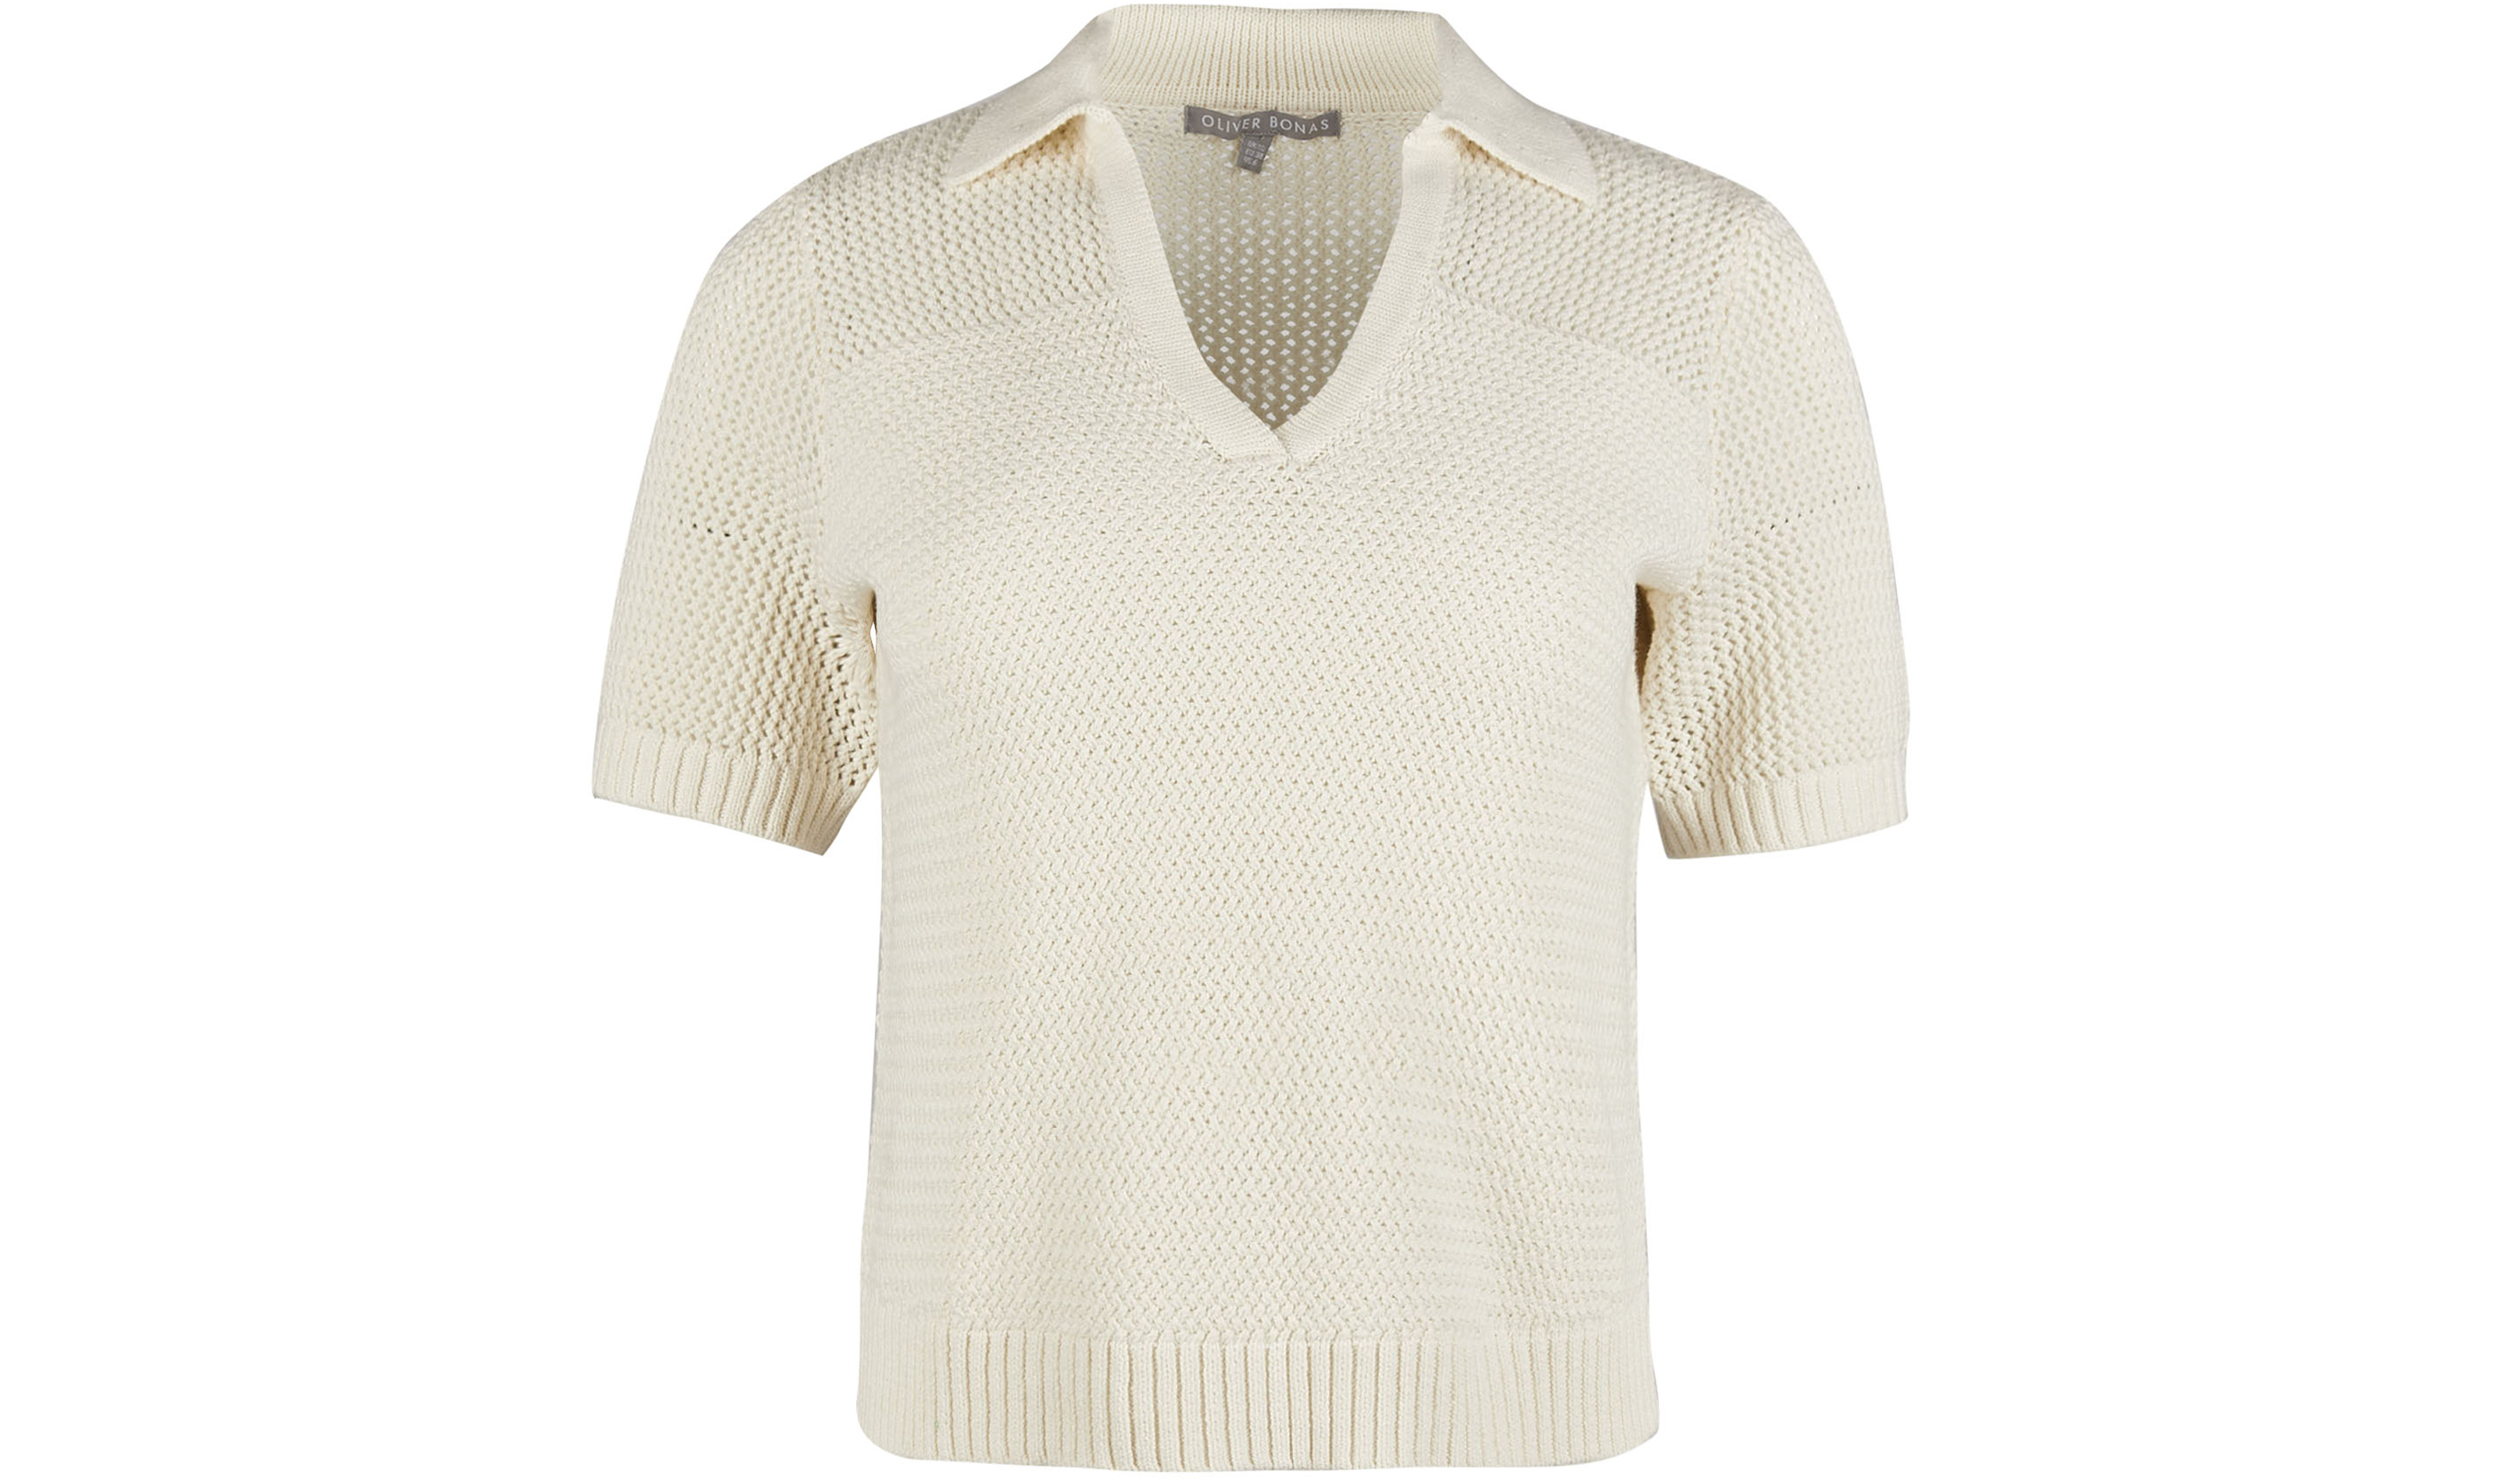 Oliver Bonas Mesh Stitch White Knitted Polo Top, £45